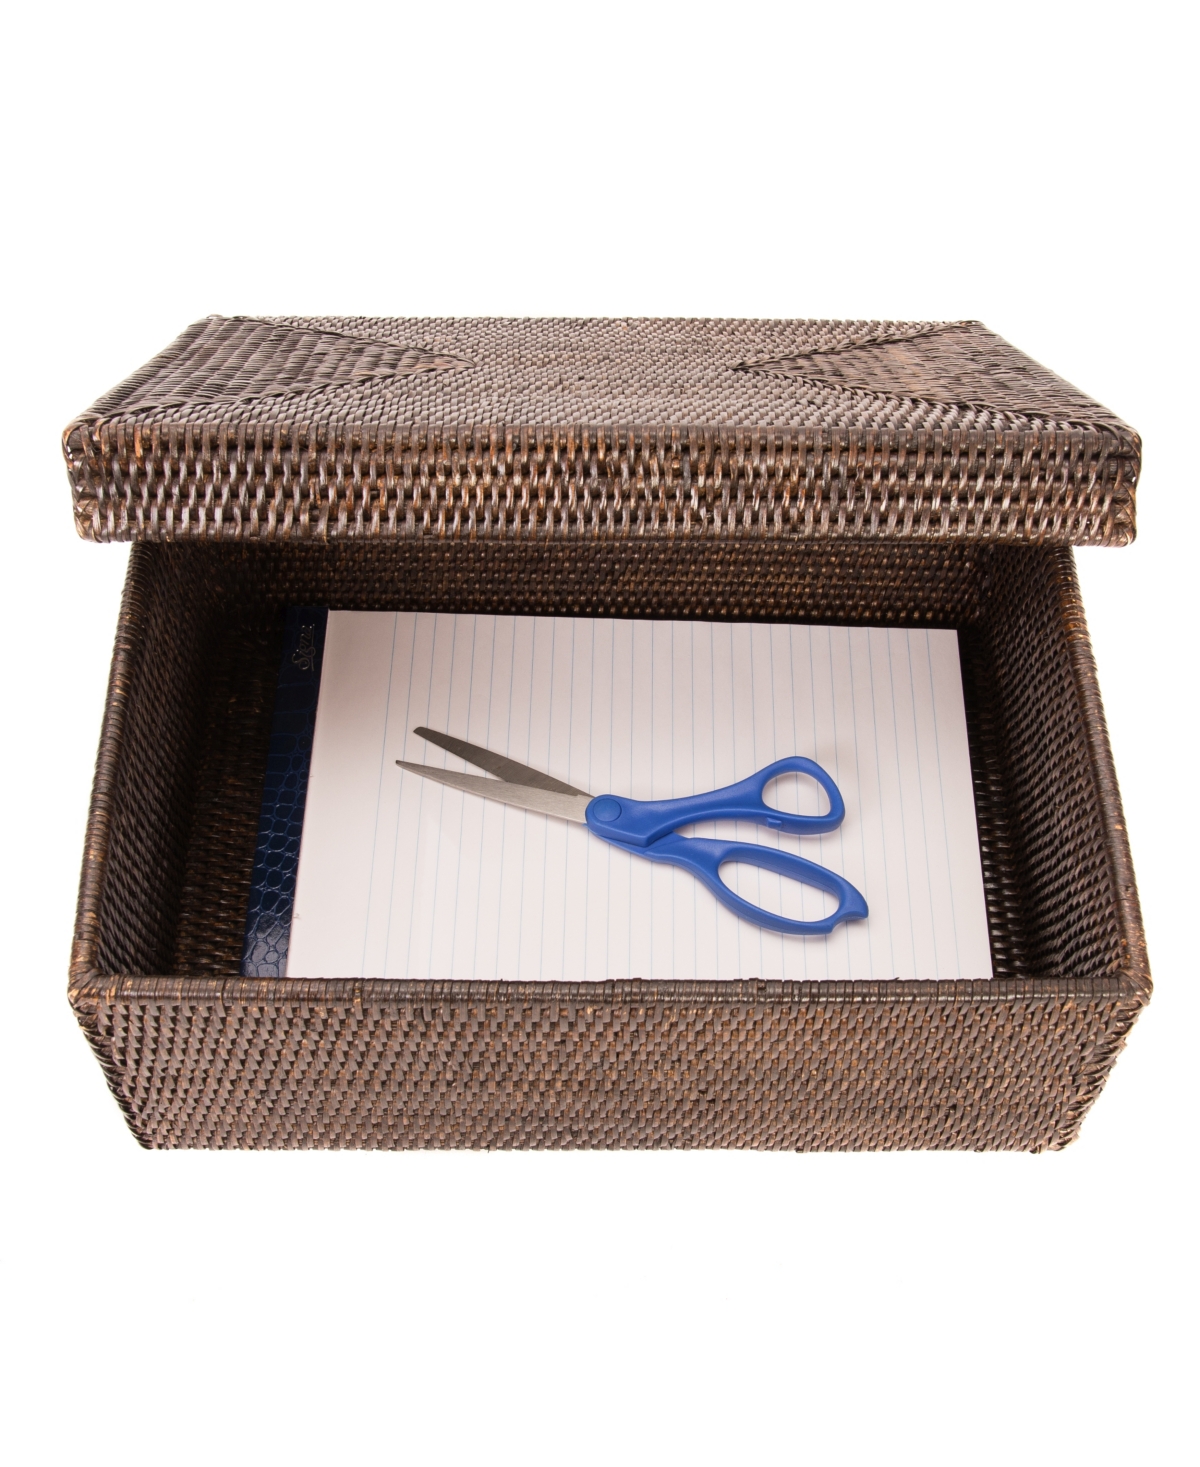 Shop Artifacts Trading Company Artifacts Rattan Rectangular Storage Box With Lid In Coffee Bean